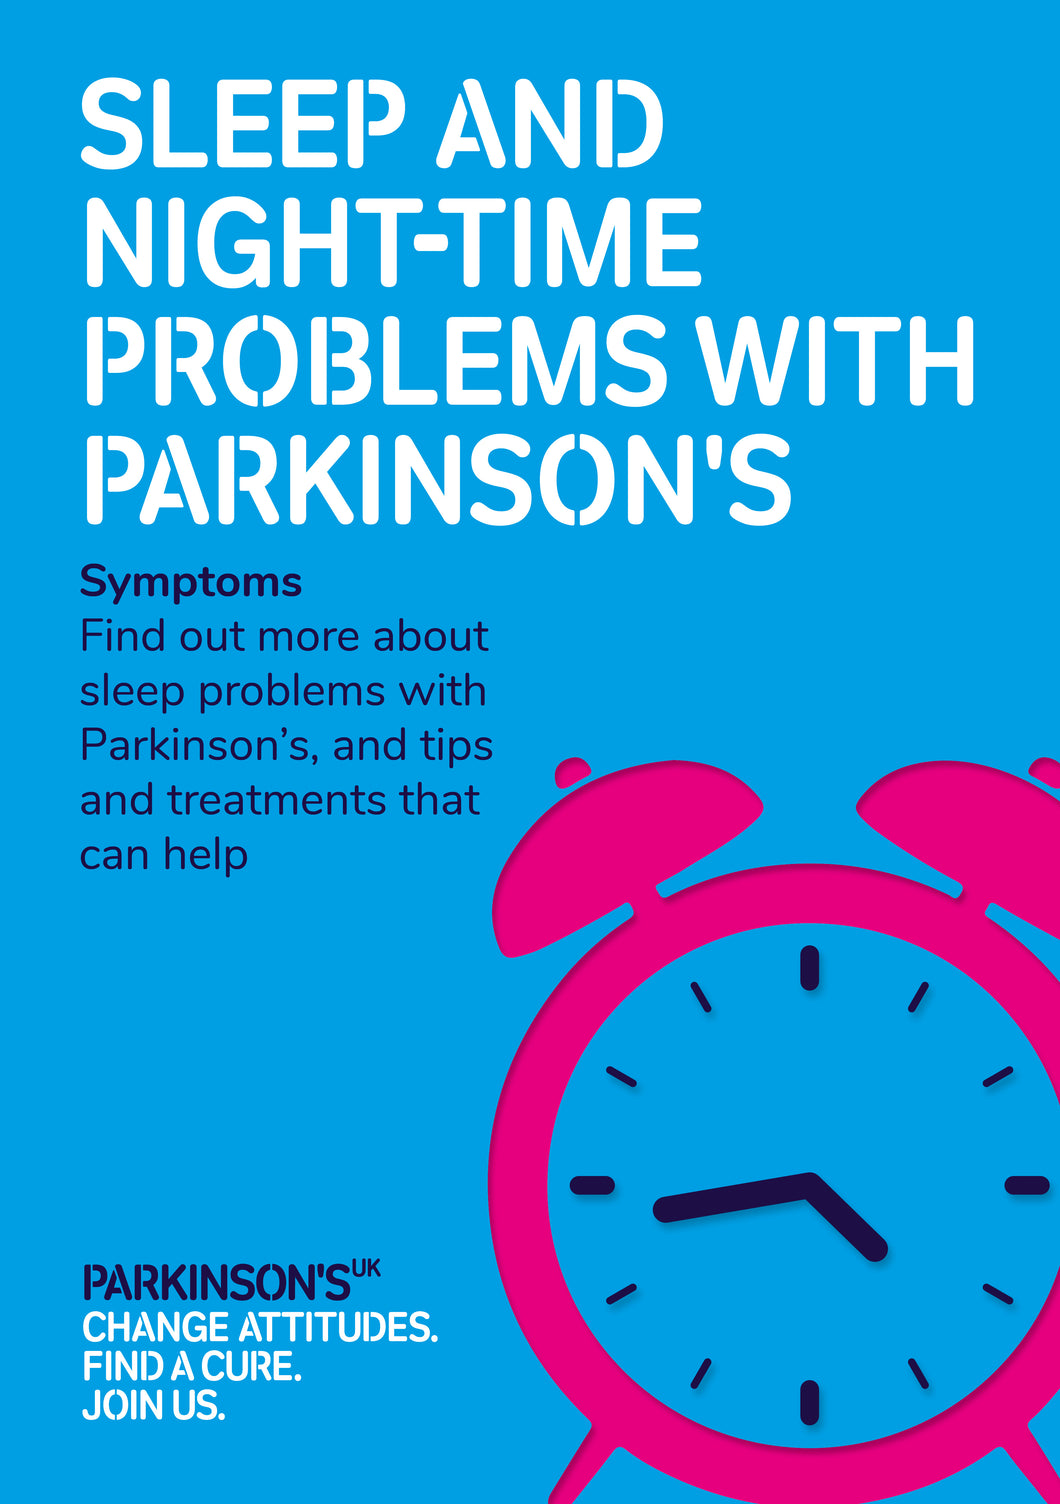 Sleep and night-time problems in Parkinson’s